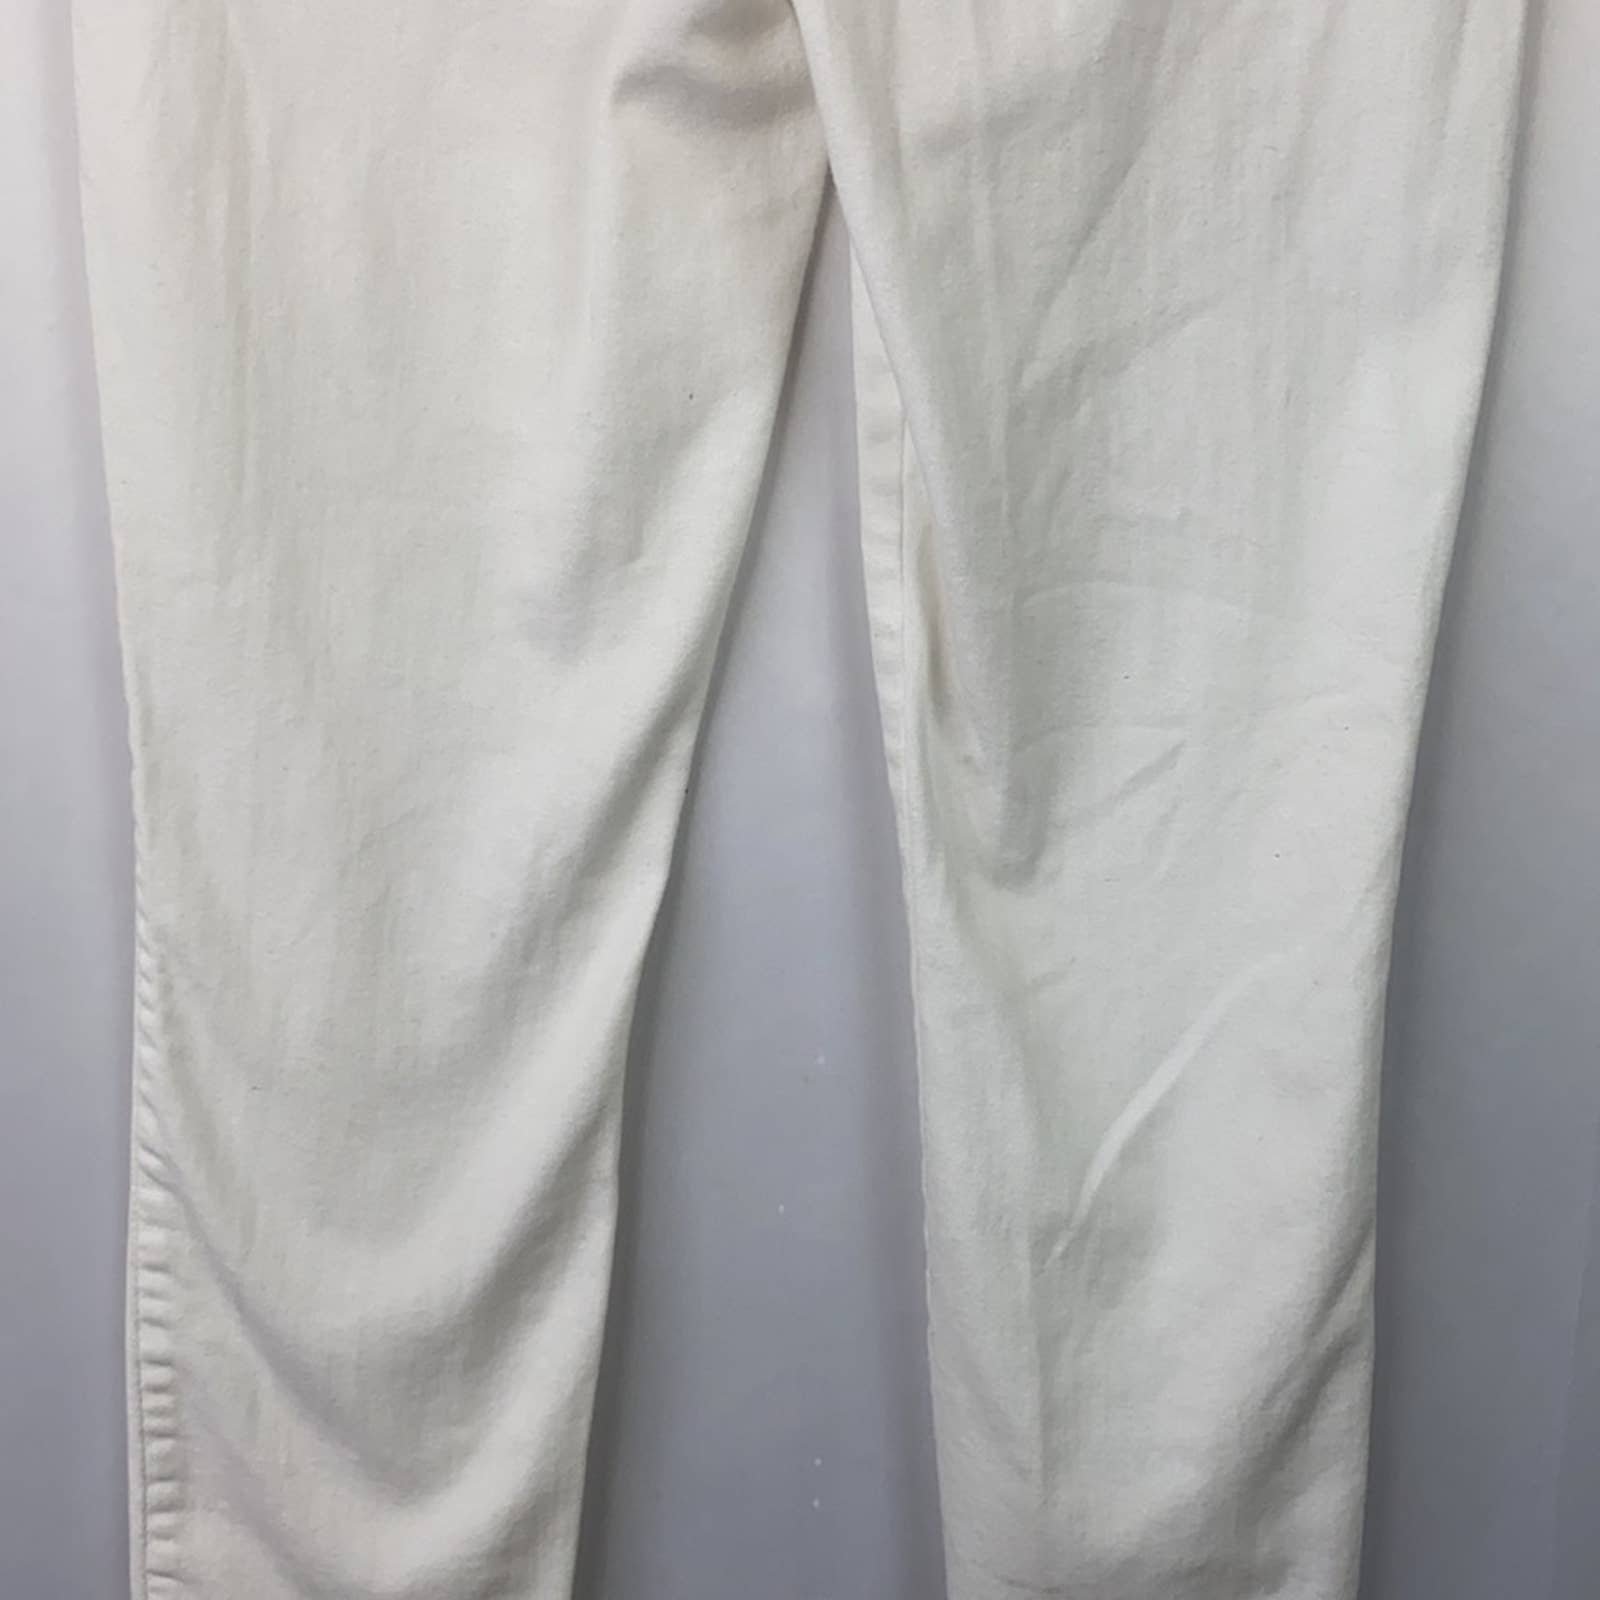 Discounted Rock & Republic Berlin Women´s White  Denim Skinny Jeans Size 10 jRW6p38aG just for you